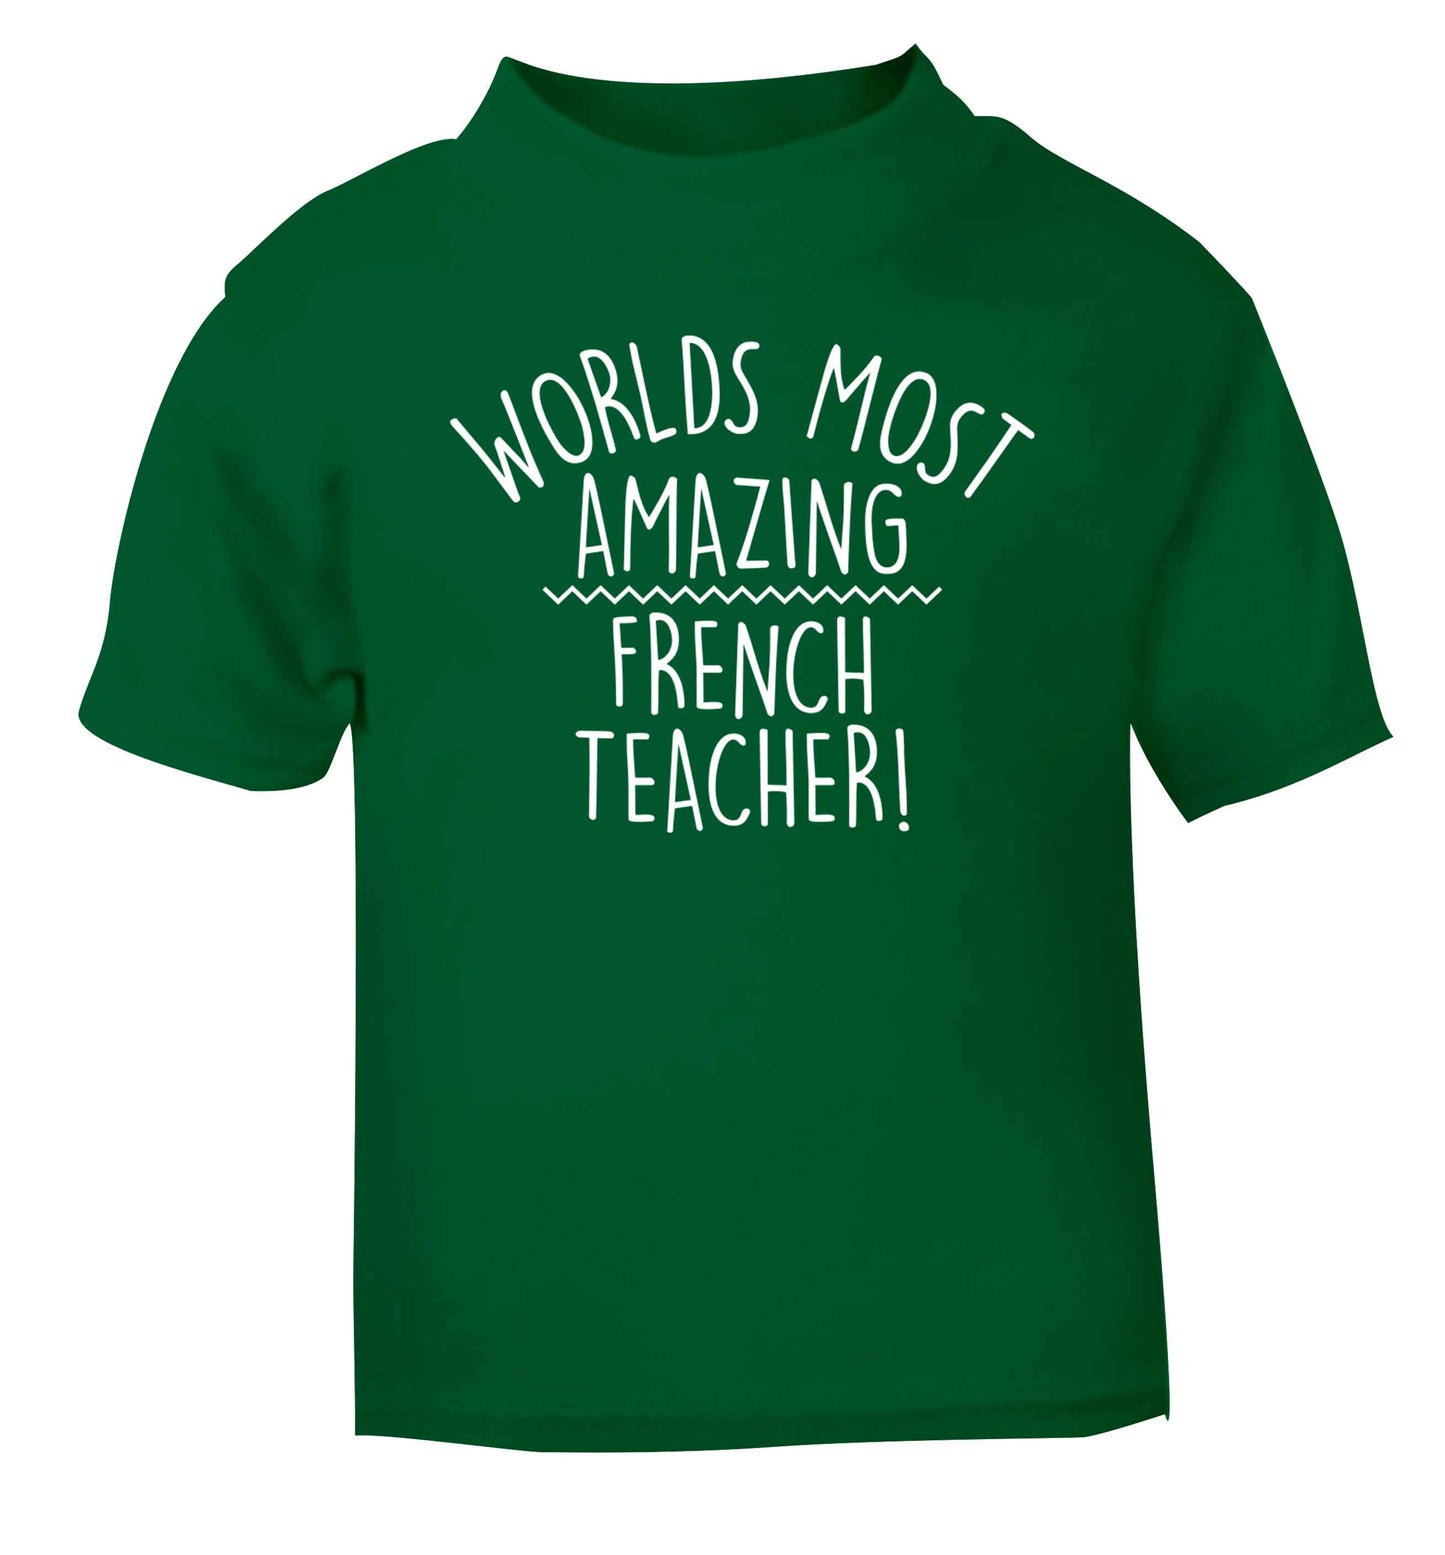 Worlds most amazing French teacher green baby toddler Tshirt 2 Years